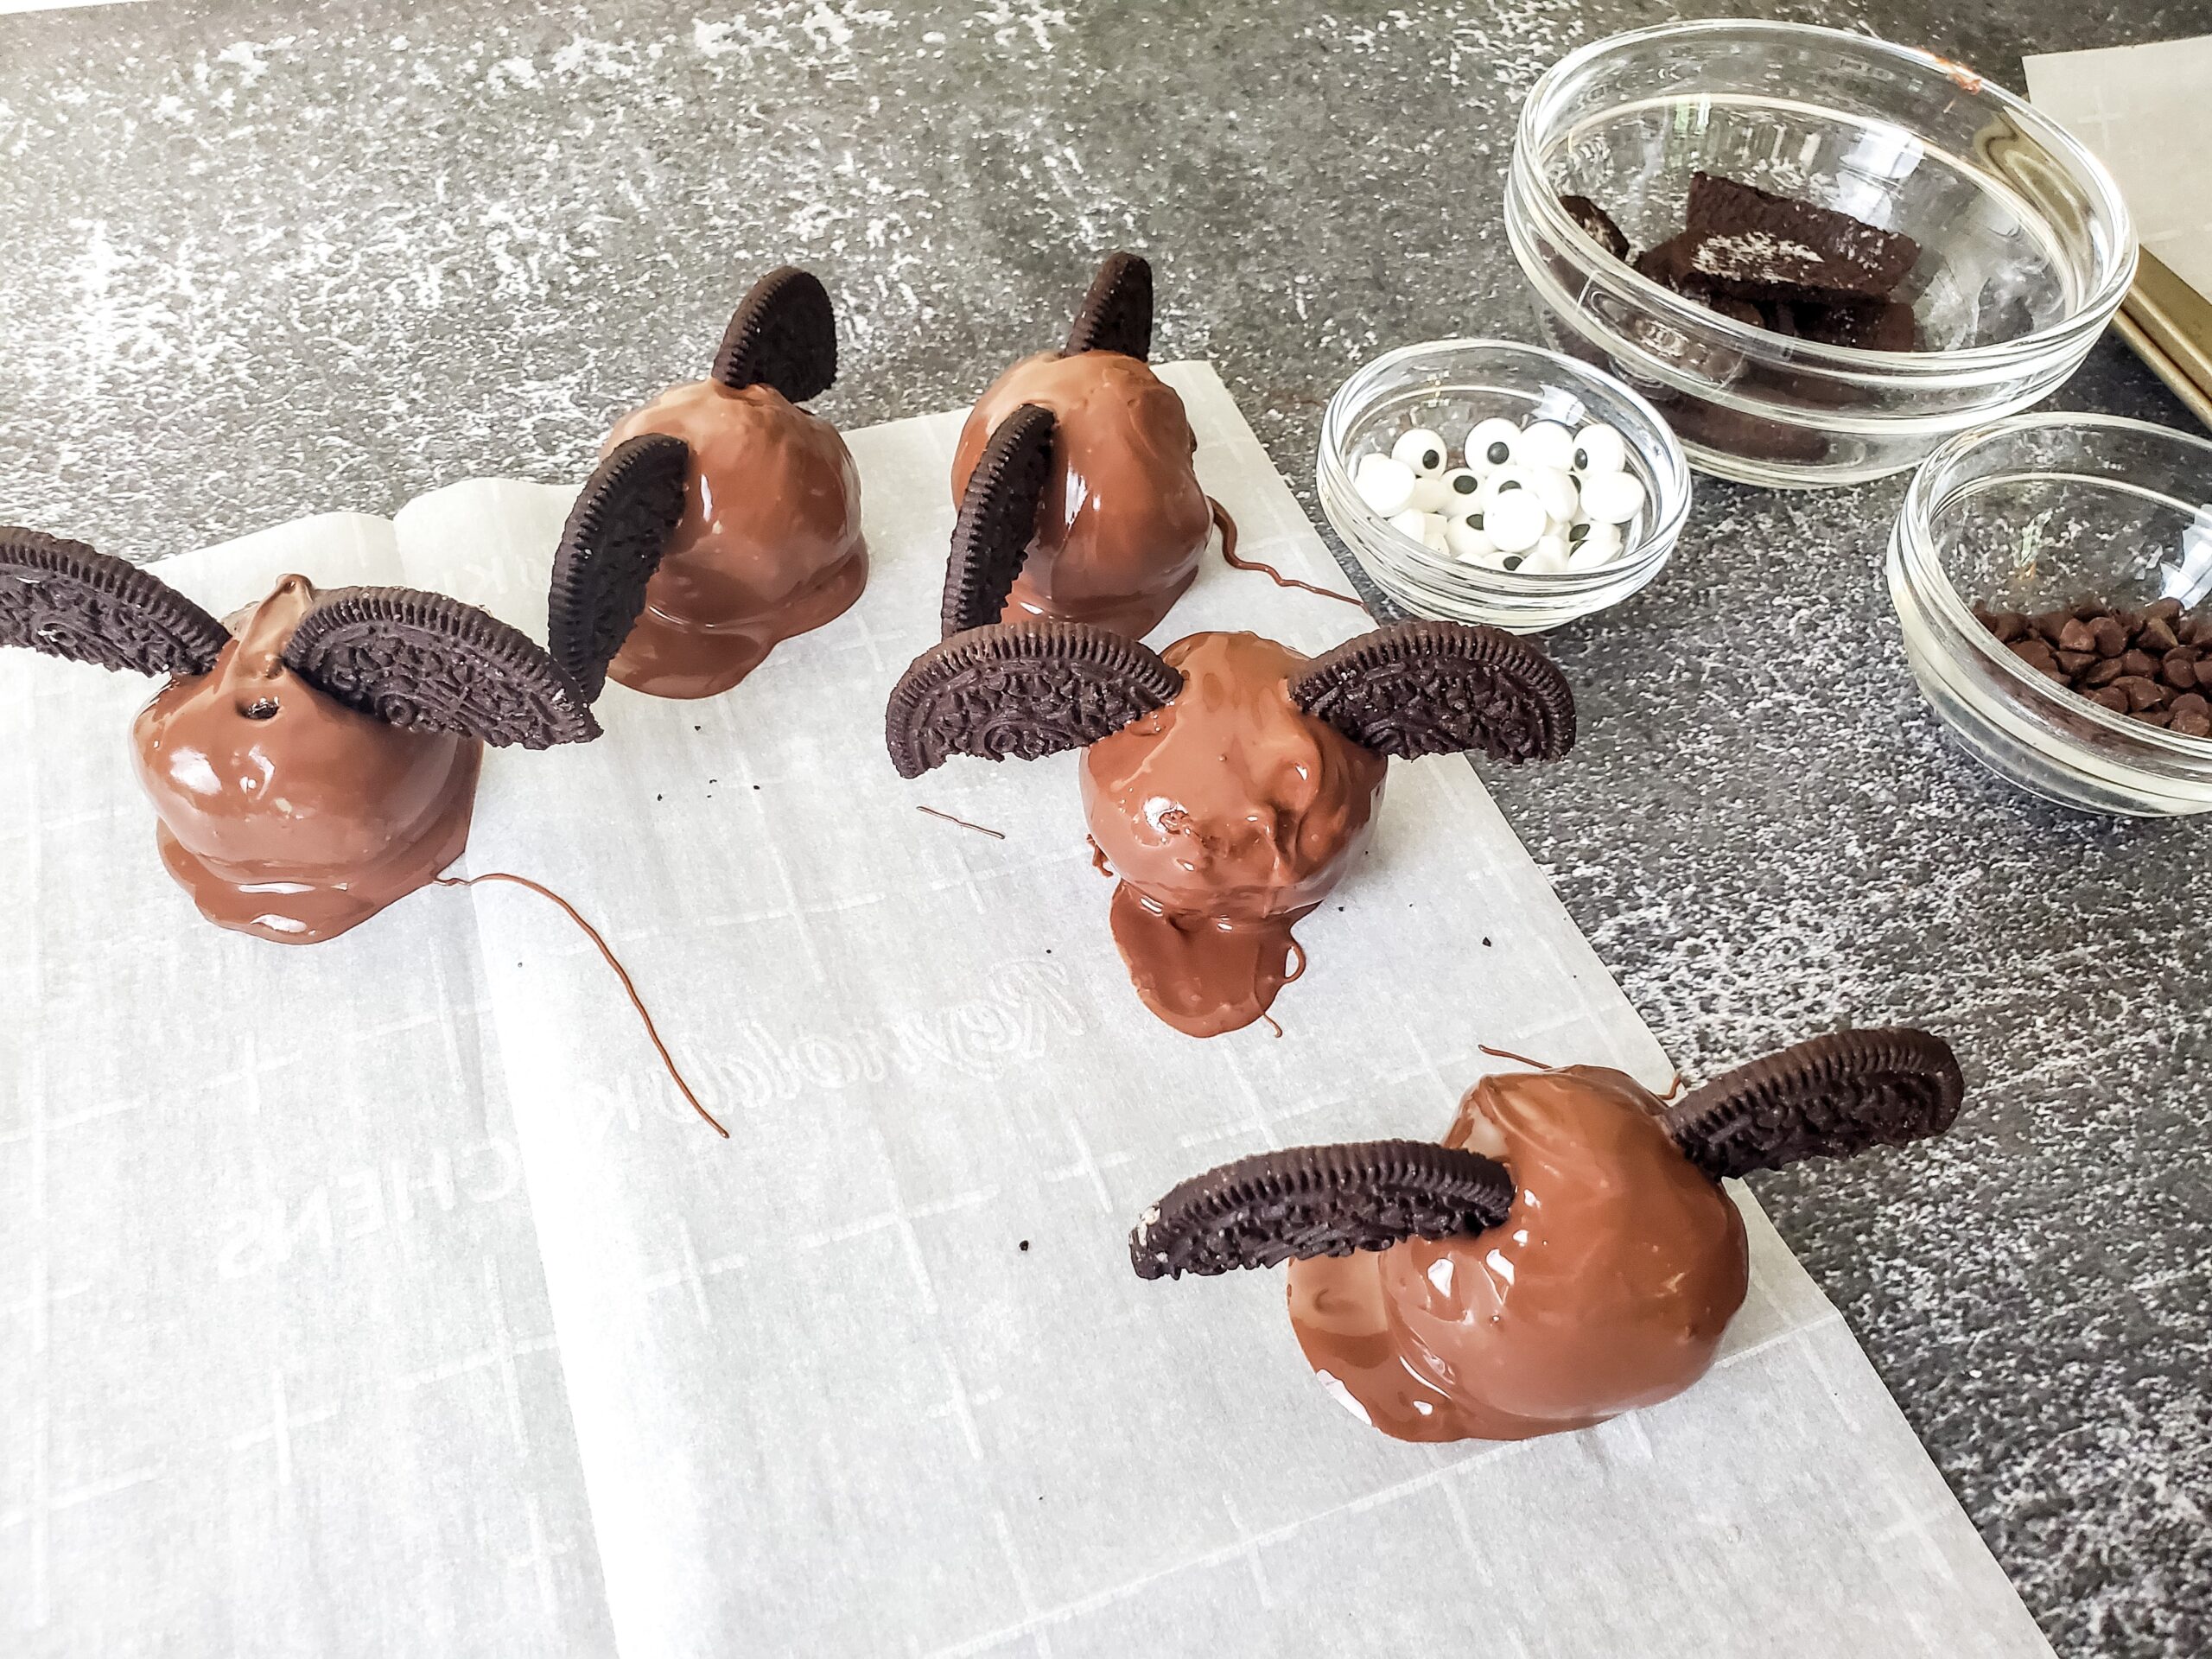 chocolate over bats with oreos for ears